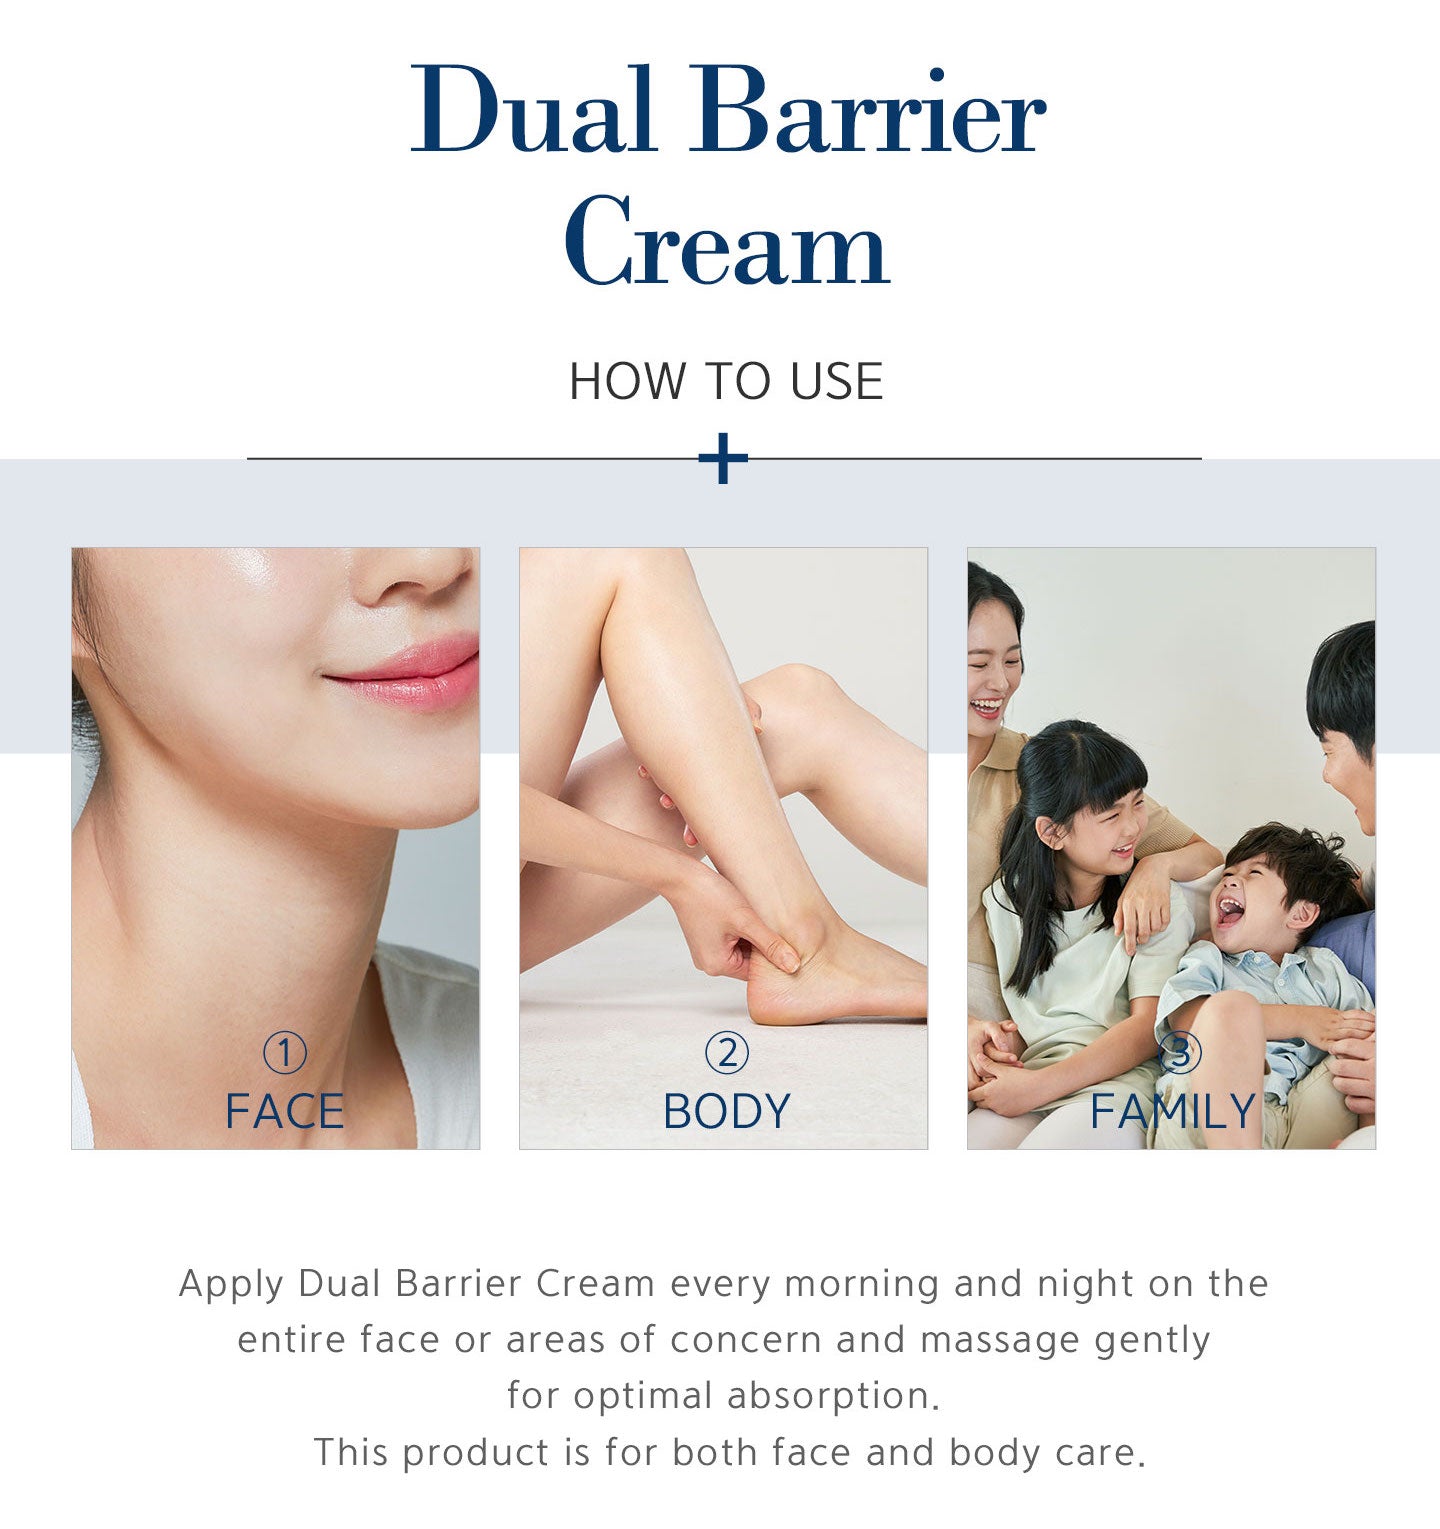 Apply dual barrier cream every morning and night on the entire face or areas of concern and massage gently for optimal absorption. This product is for both face and body care. 